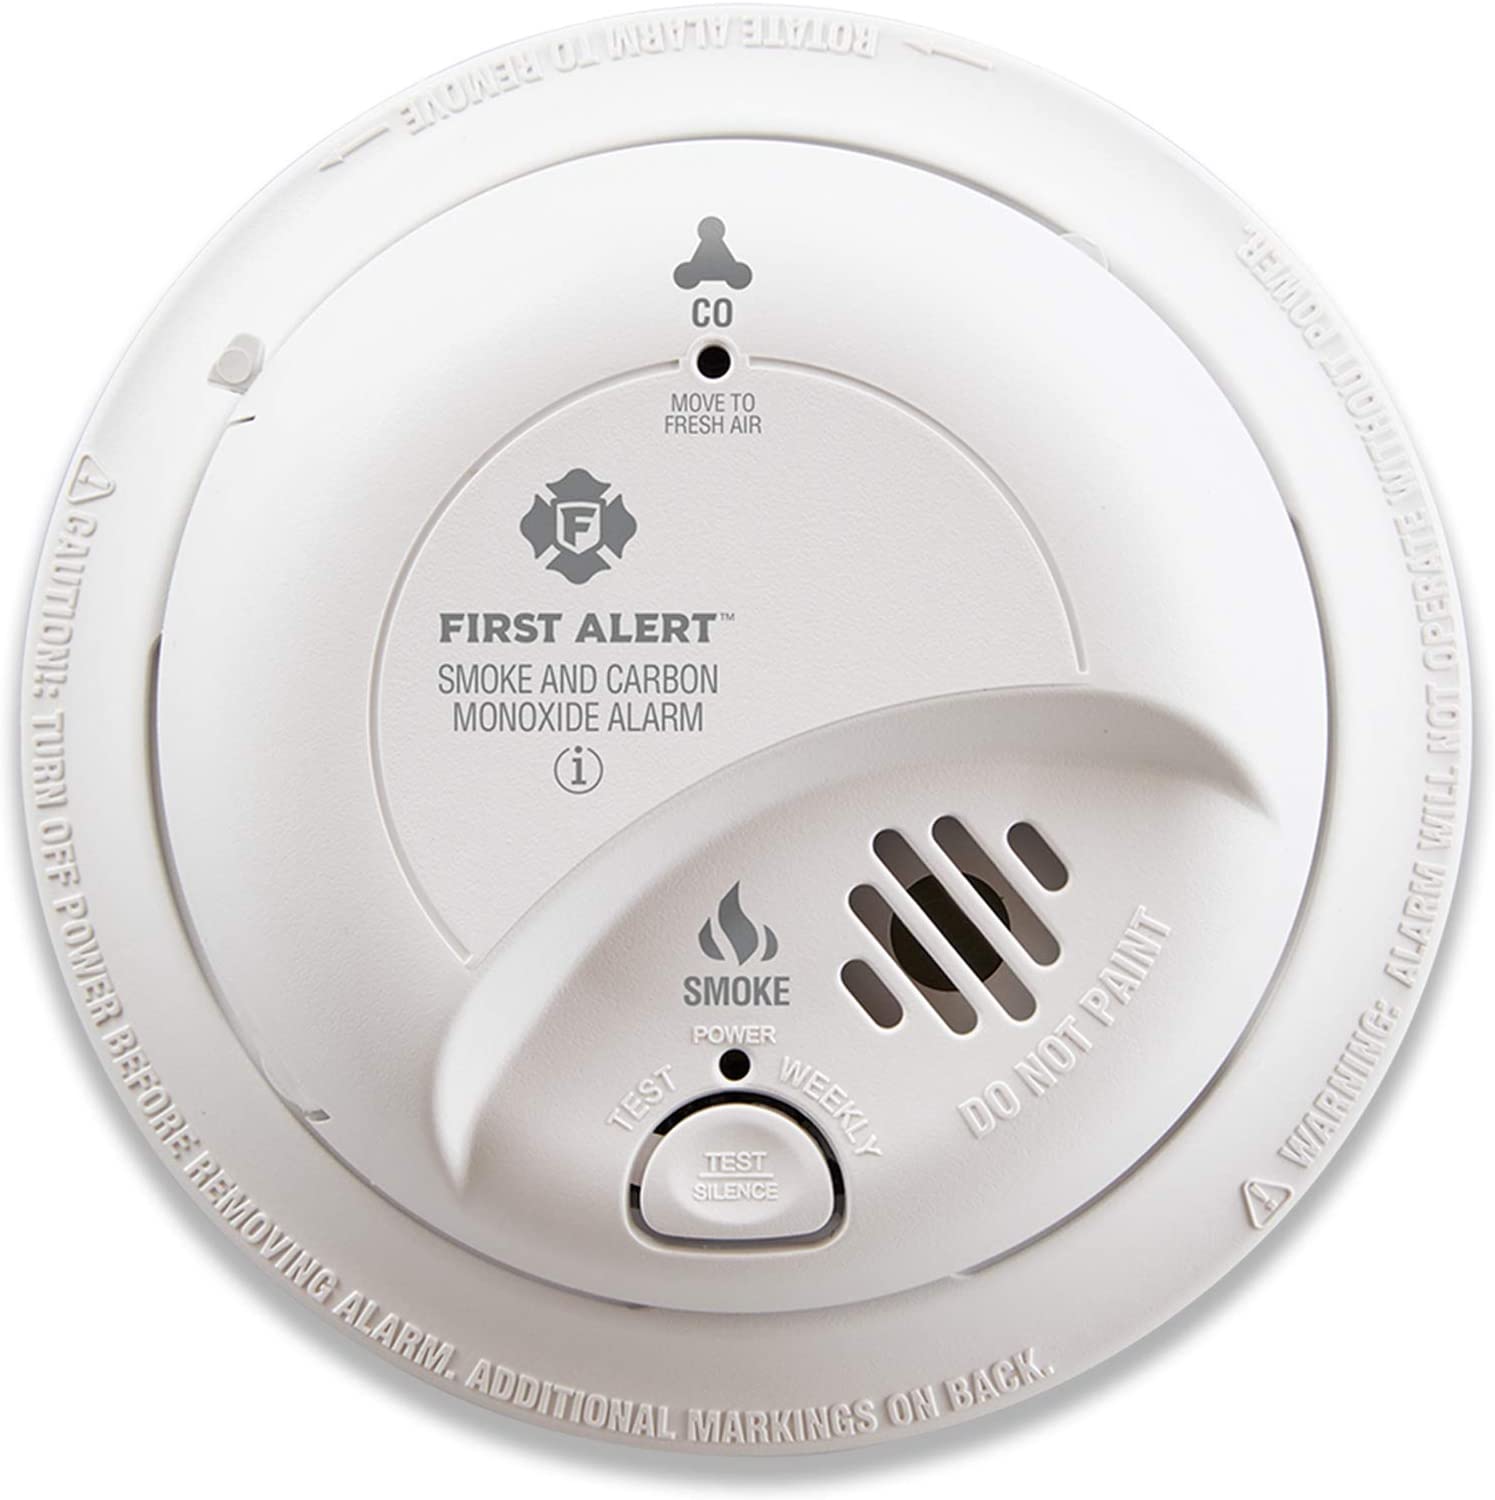 First Alert smoke and carbon monoxide alarm with a 10-year battery backup $31.5